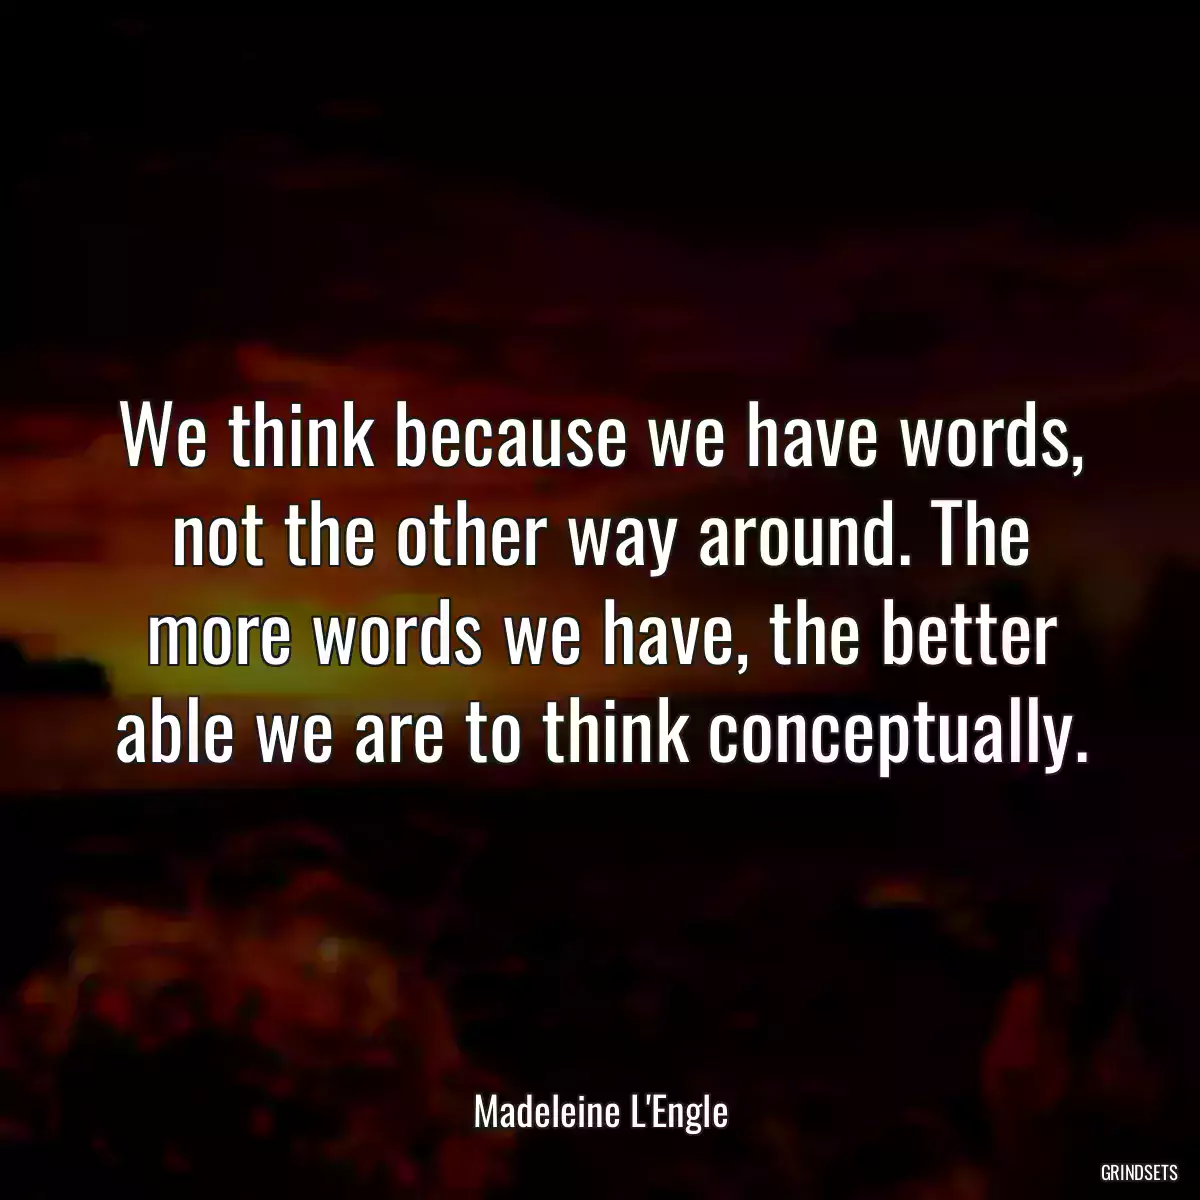 We think because we have words, not the other way around. The more words we have, the better able we are to think conceptually.